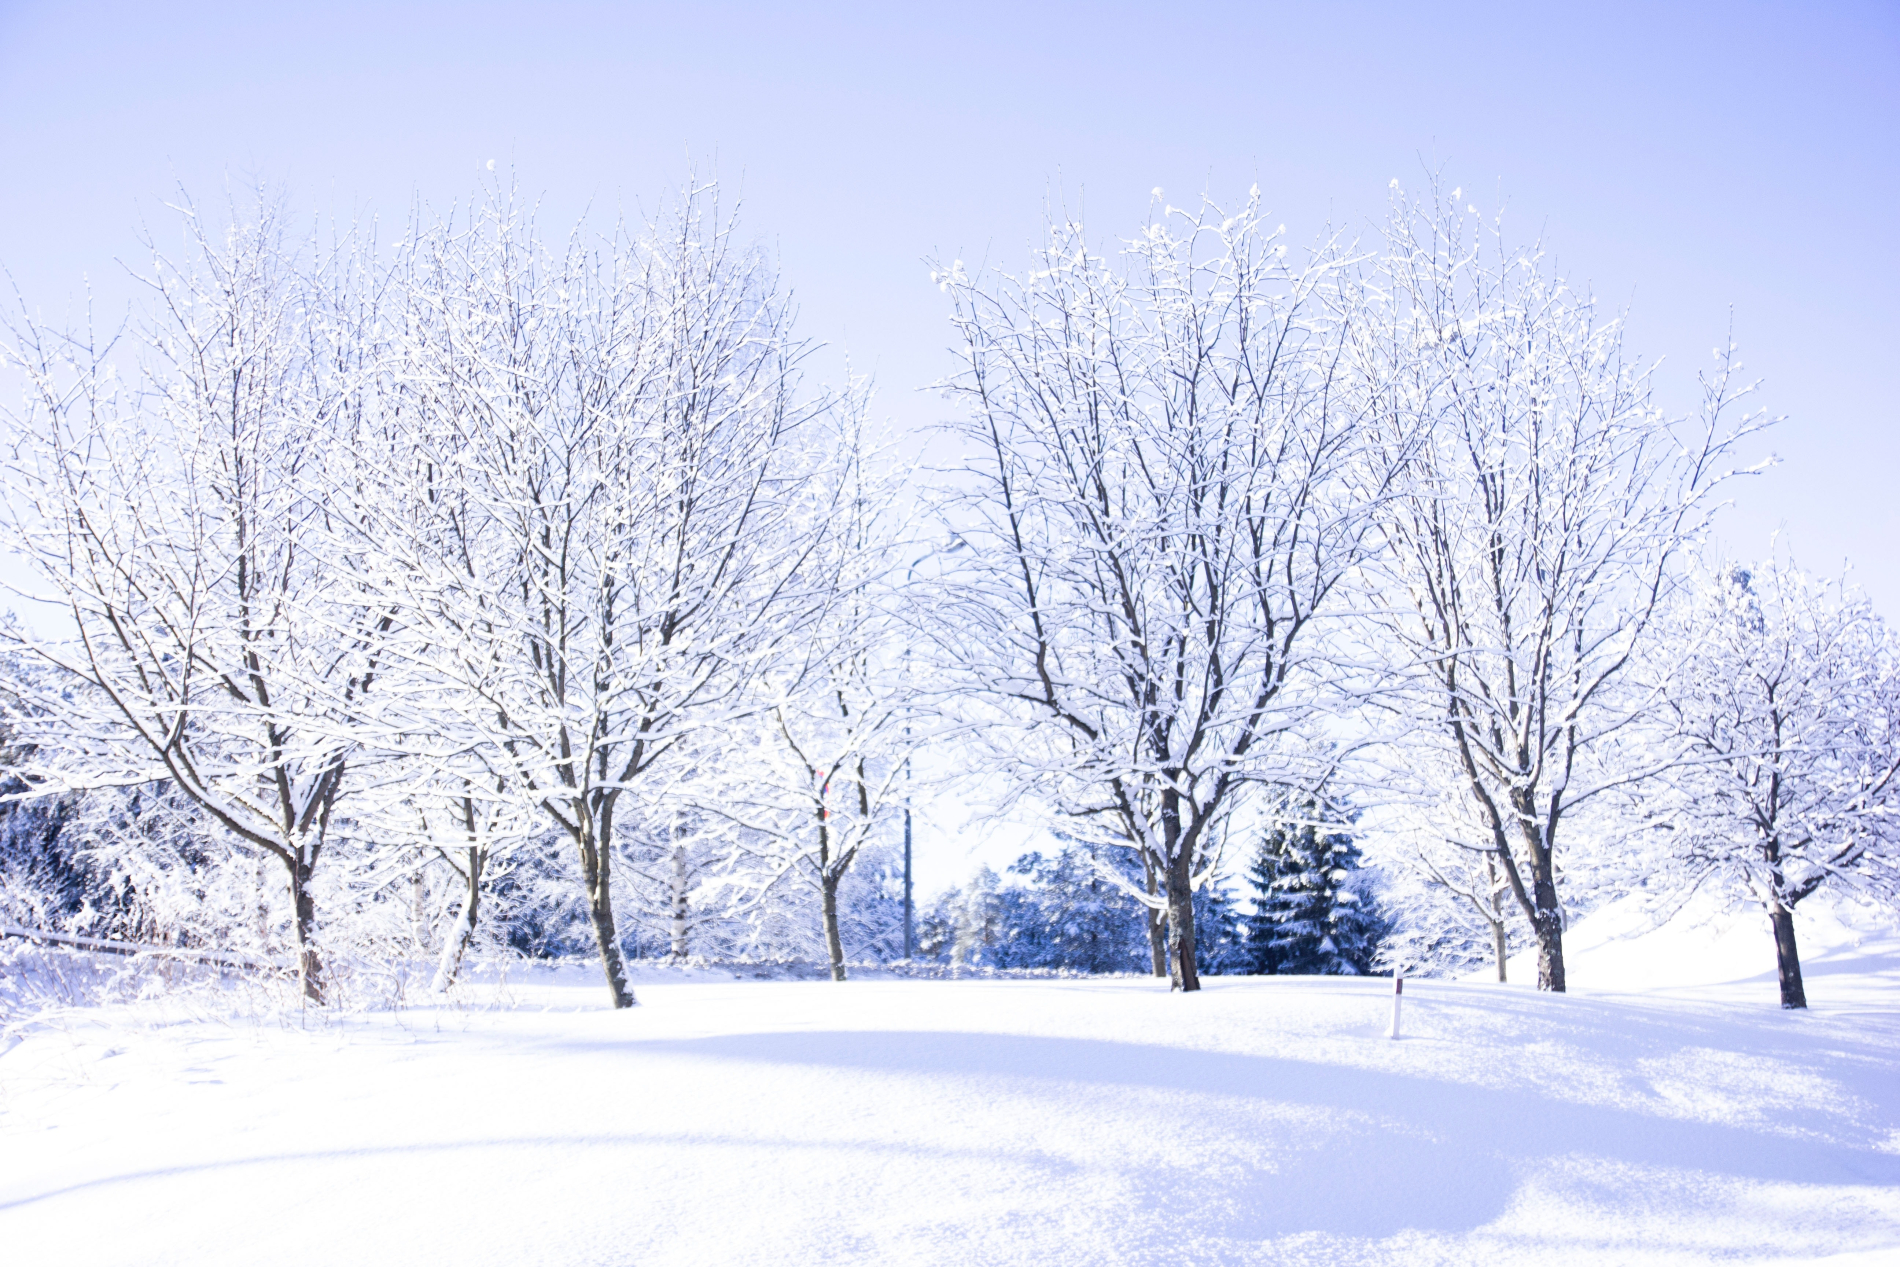 a snow-covered field with a row of bare, snow-covered trees at the end, against a blue sky